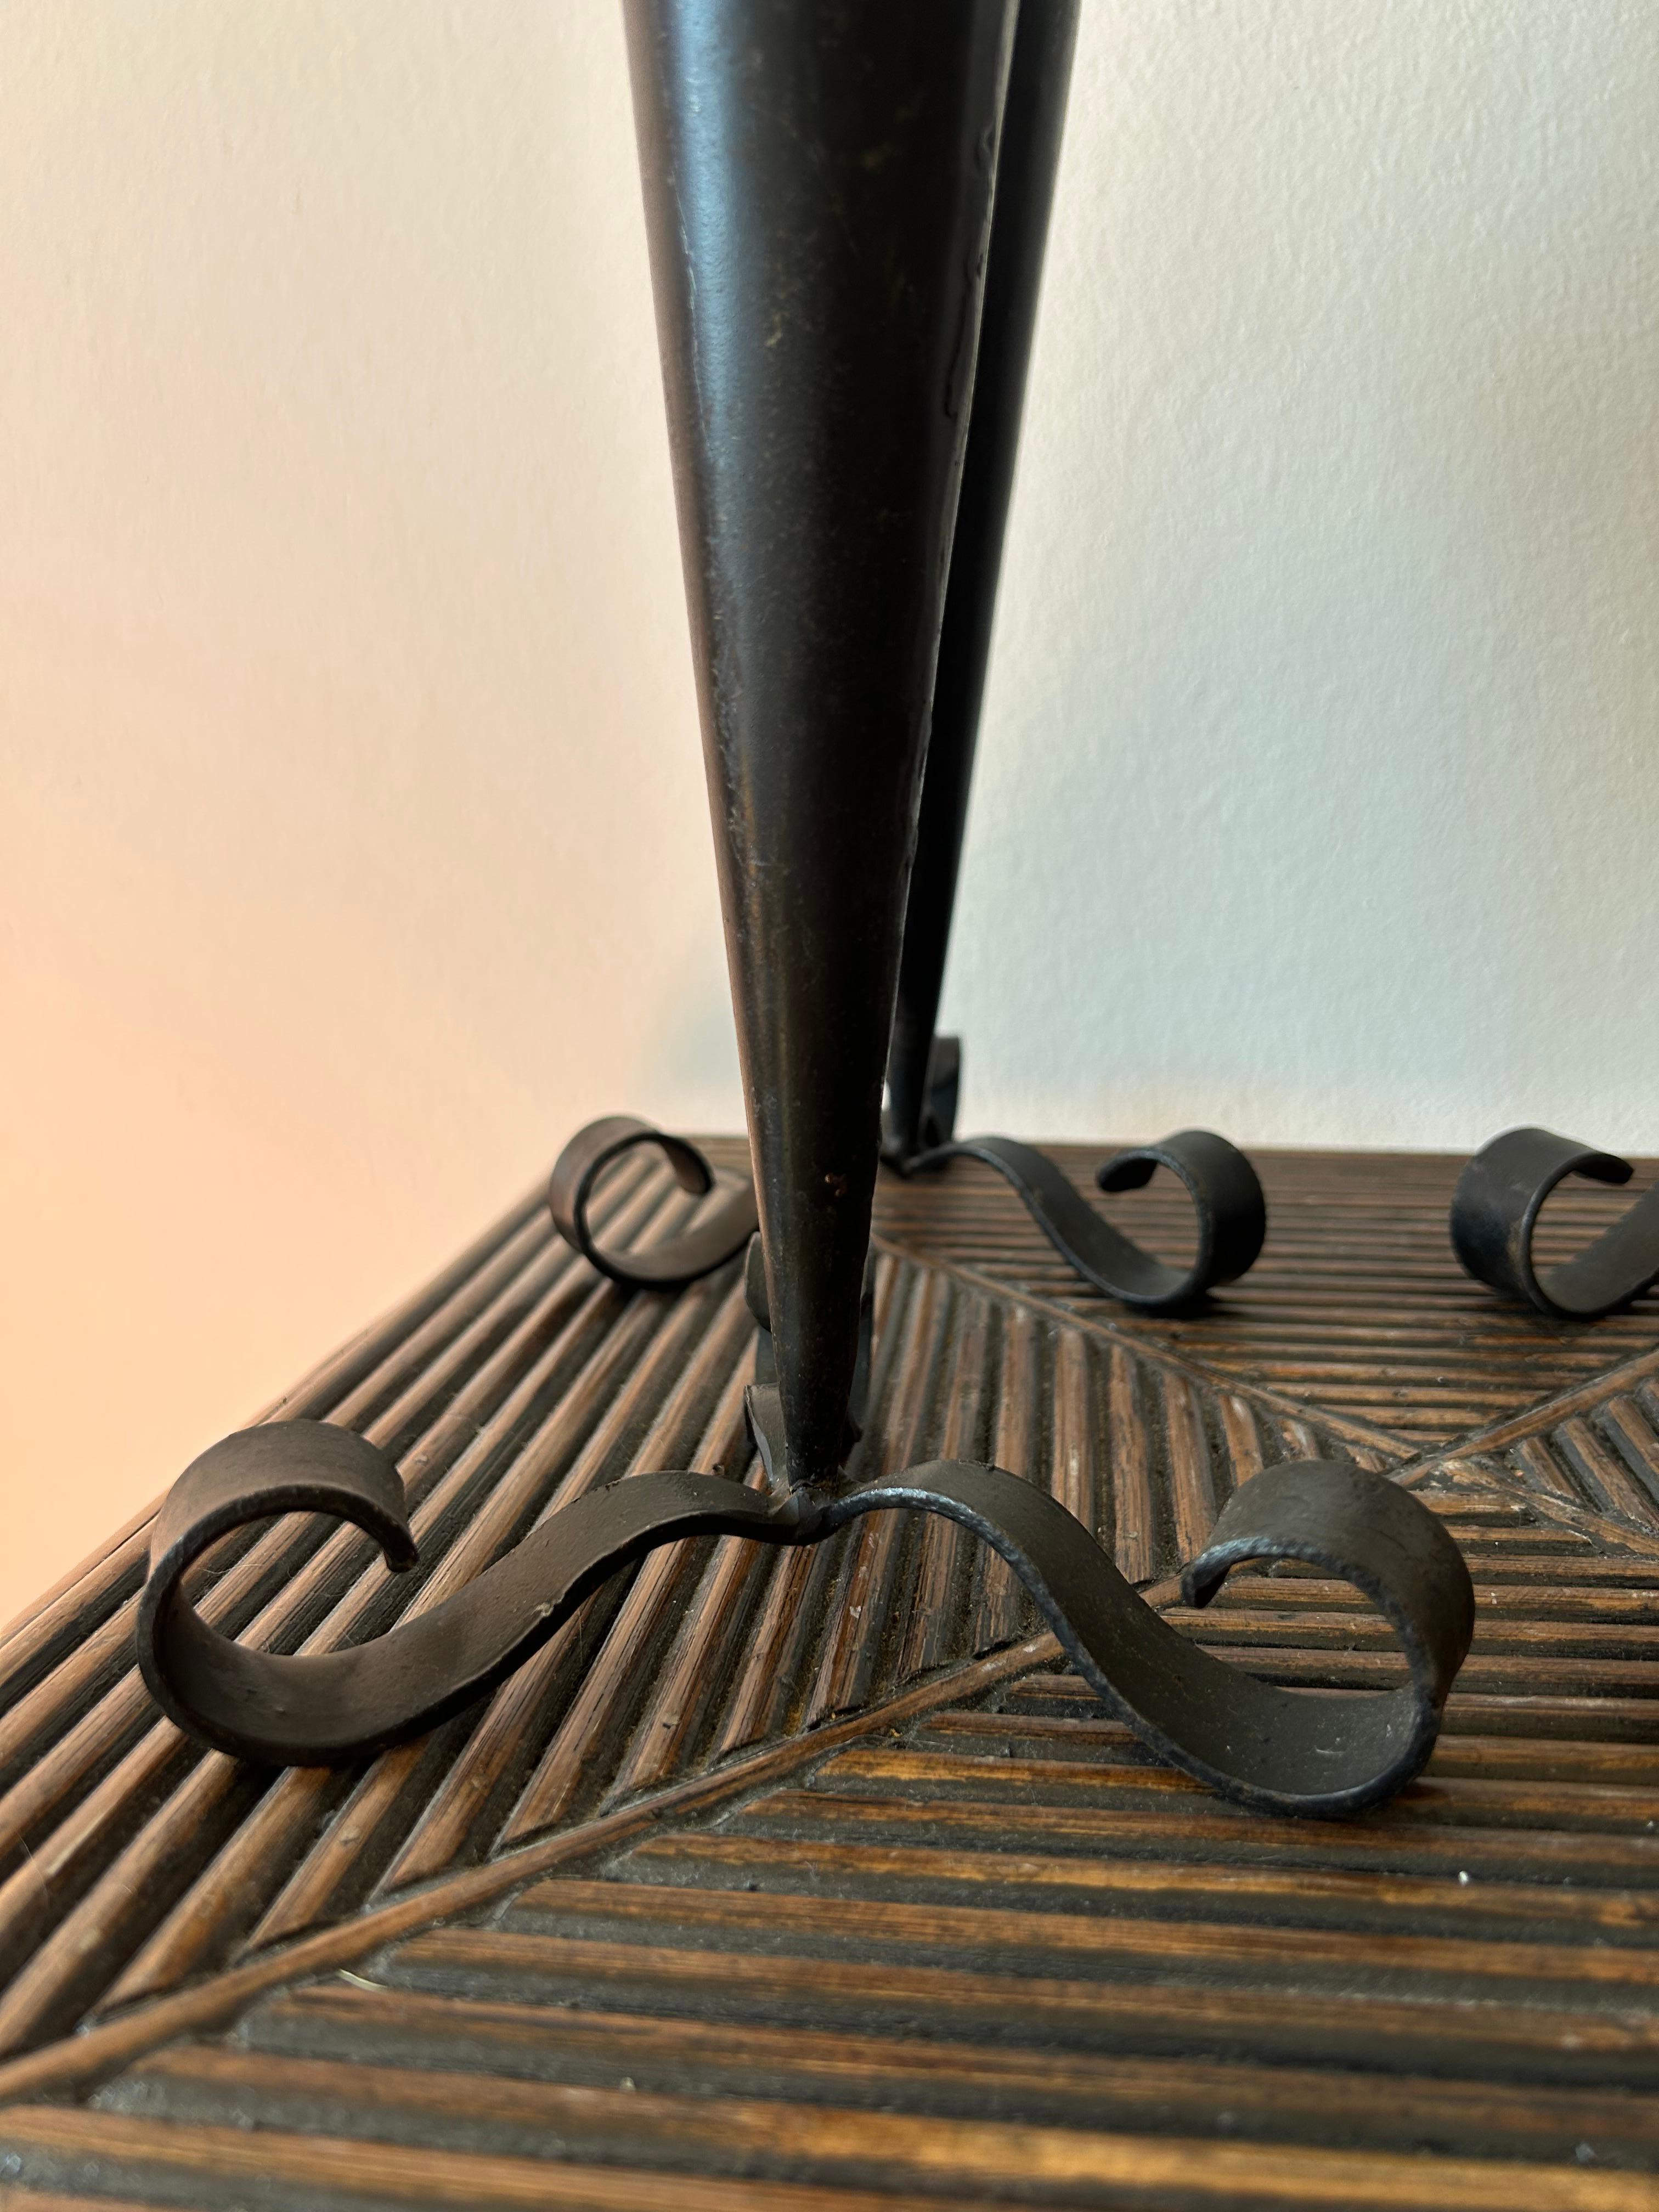 Set of four sculptural art deco candle sticks in cast iron made in Denmark by a danish craftsman in the 1960's.
The candle sticks fit regular size candles.
The candle sticks are a perfect decorative detail for any style of interior from a